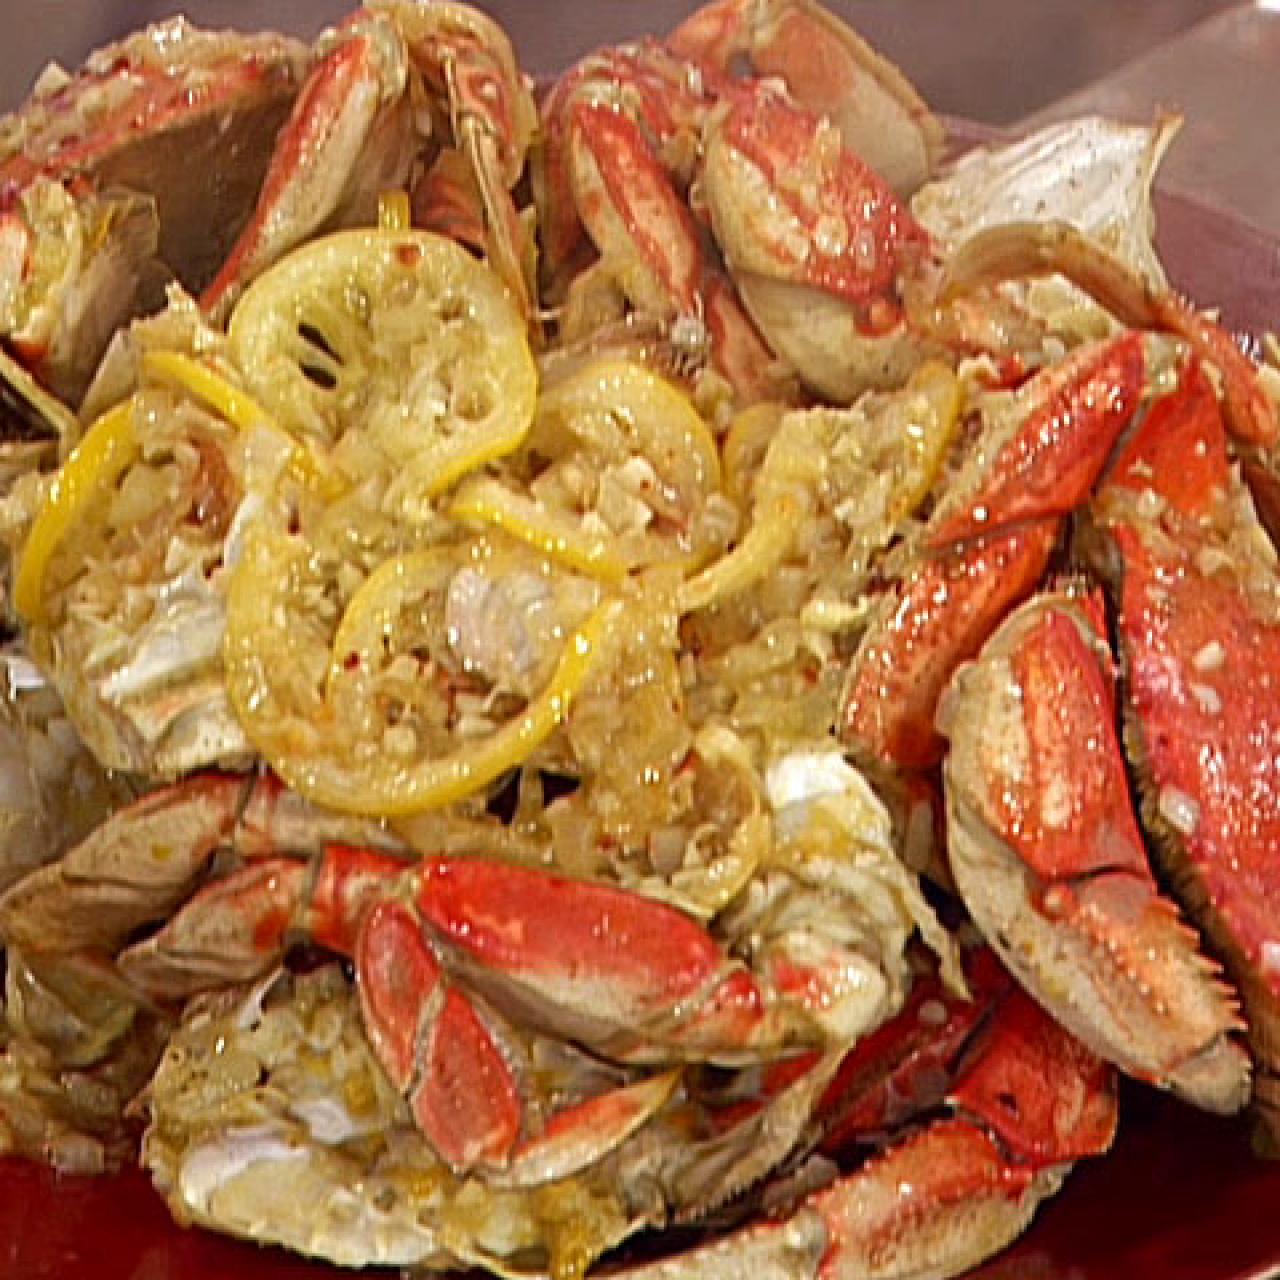 Garlic and Chile Roasted Dungeness Crabs Recipe